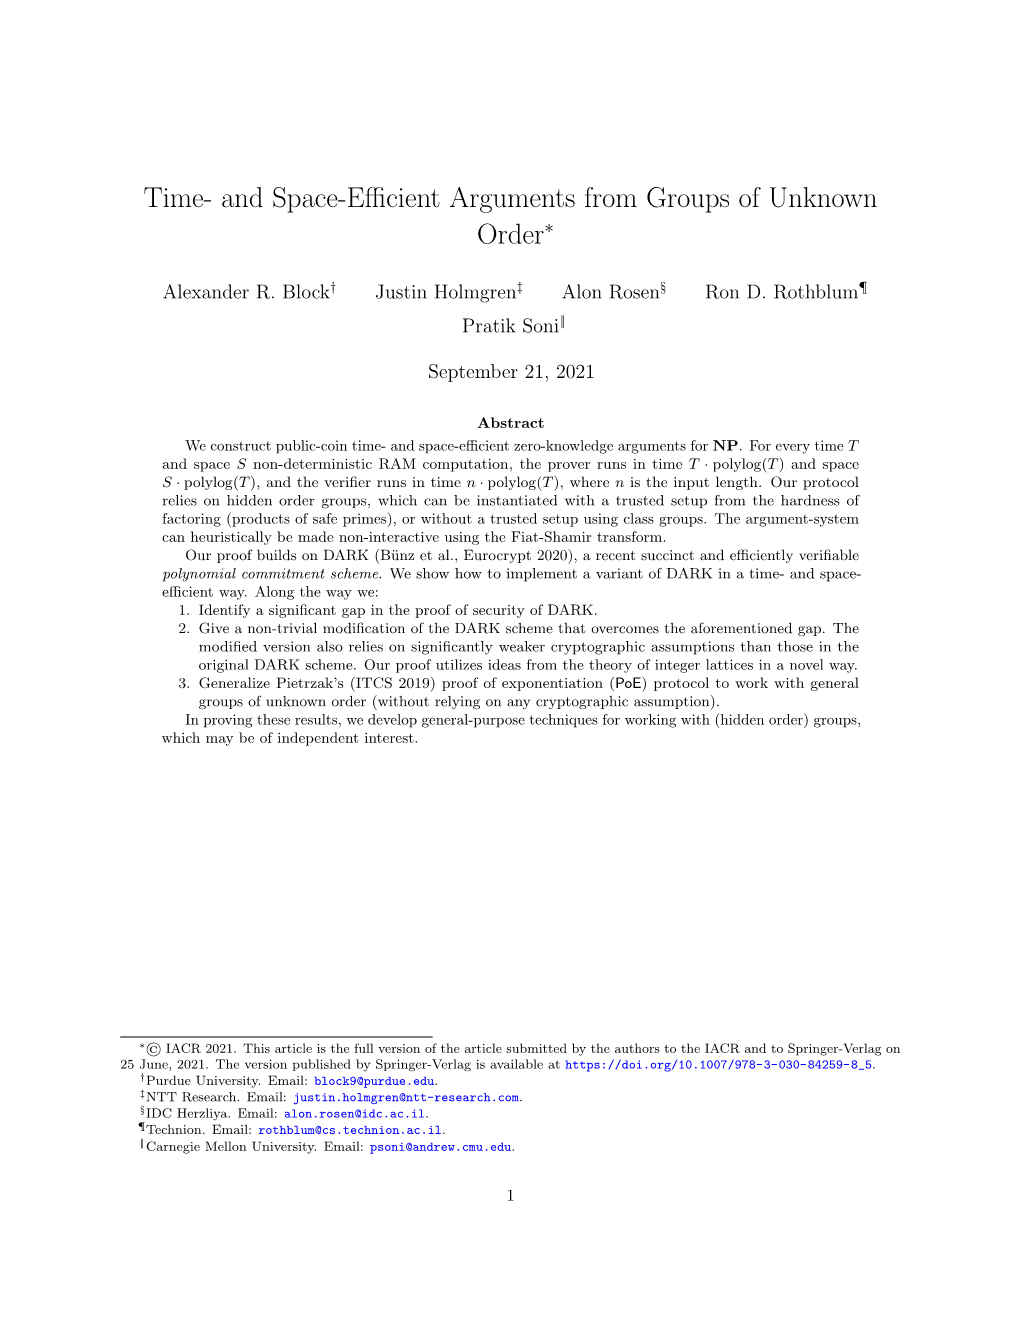 Time- and Space-Efficient Arguments from Groups of Unknown Order∗